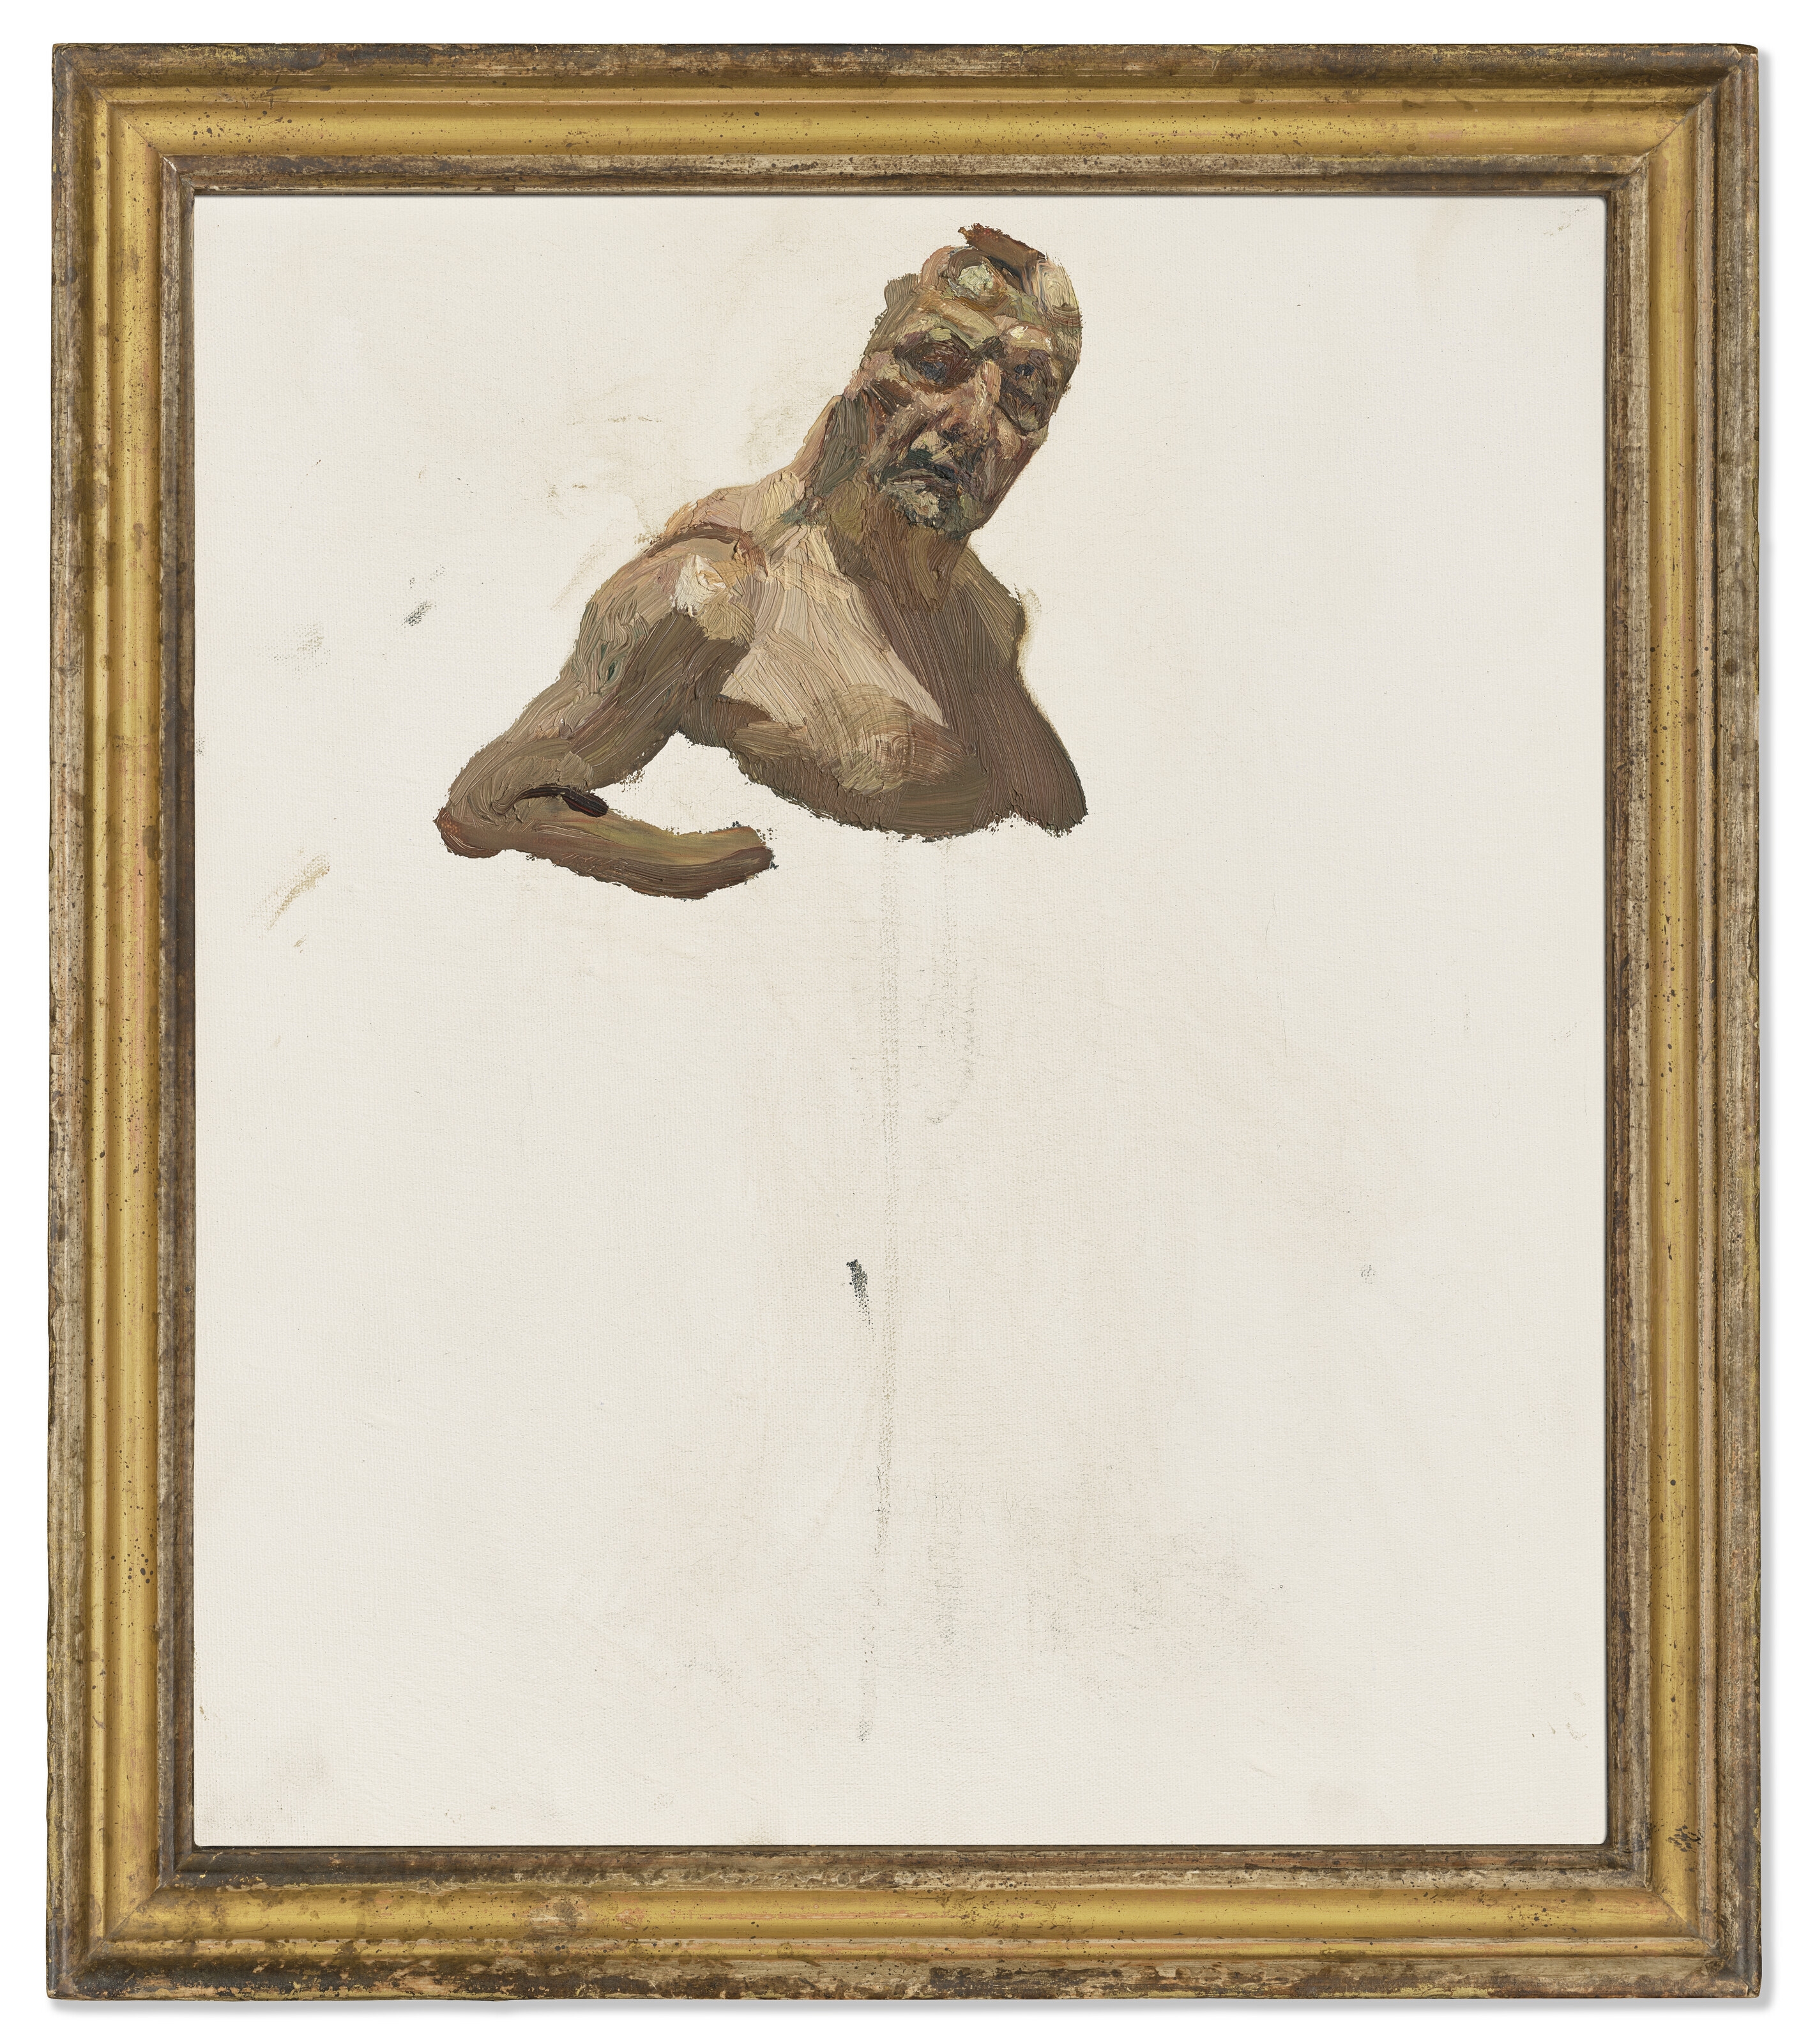 Artwork by Lucian Freud, Self-portrait (Fragment), Made of oil on canvas